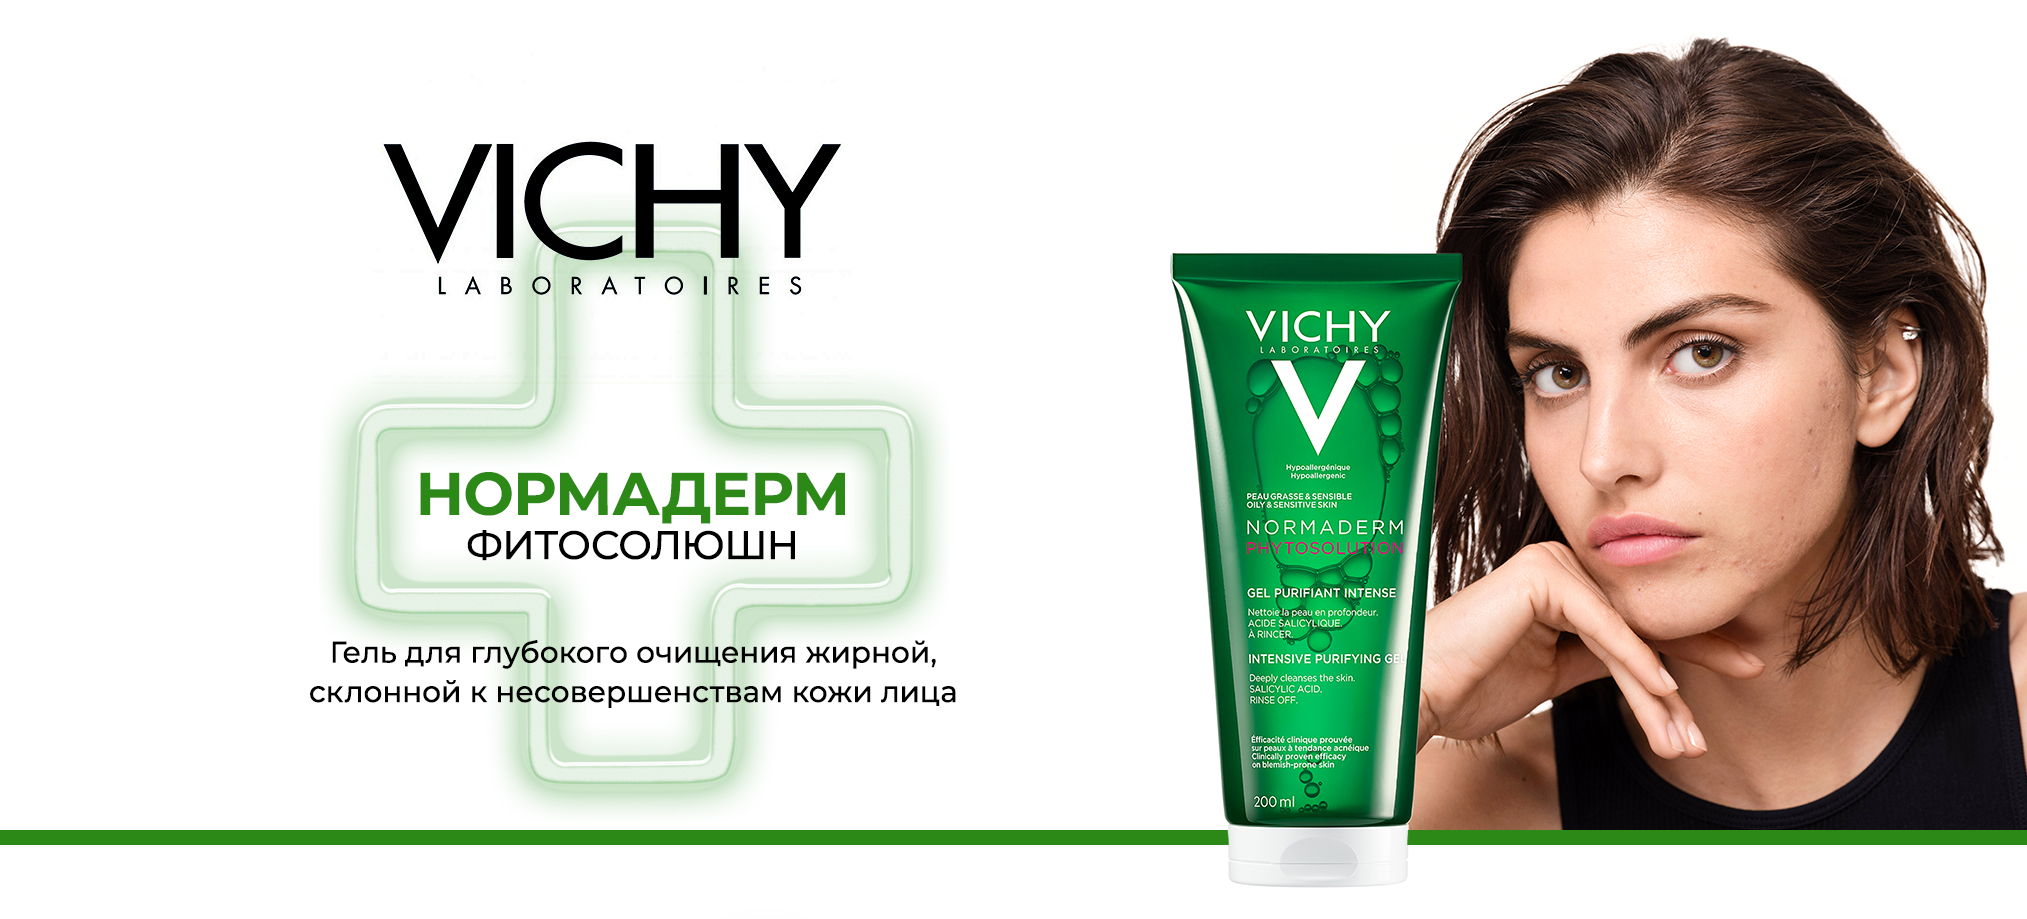 Vichy Normaderm Phytosolution Intensive Purifying Gel